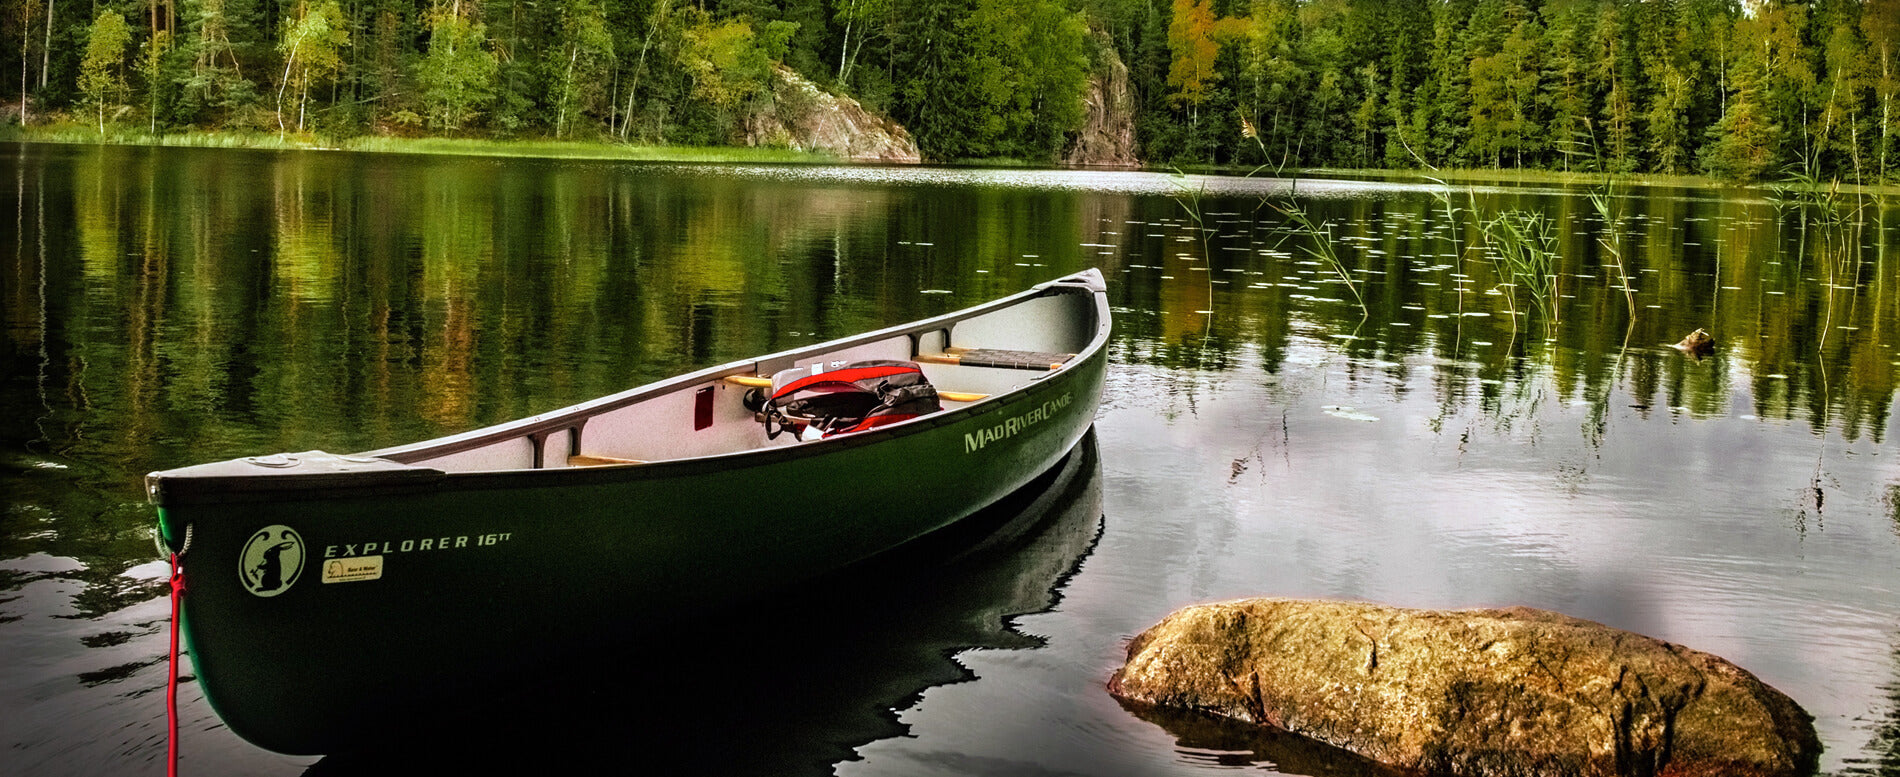 9 of the Best Canoes for Your Next Water Outing